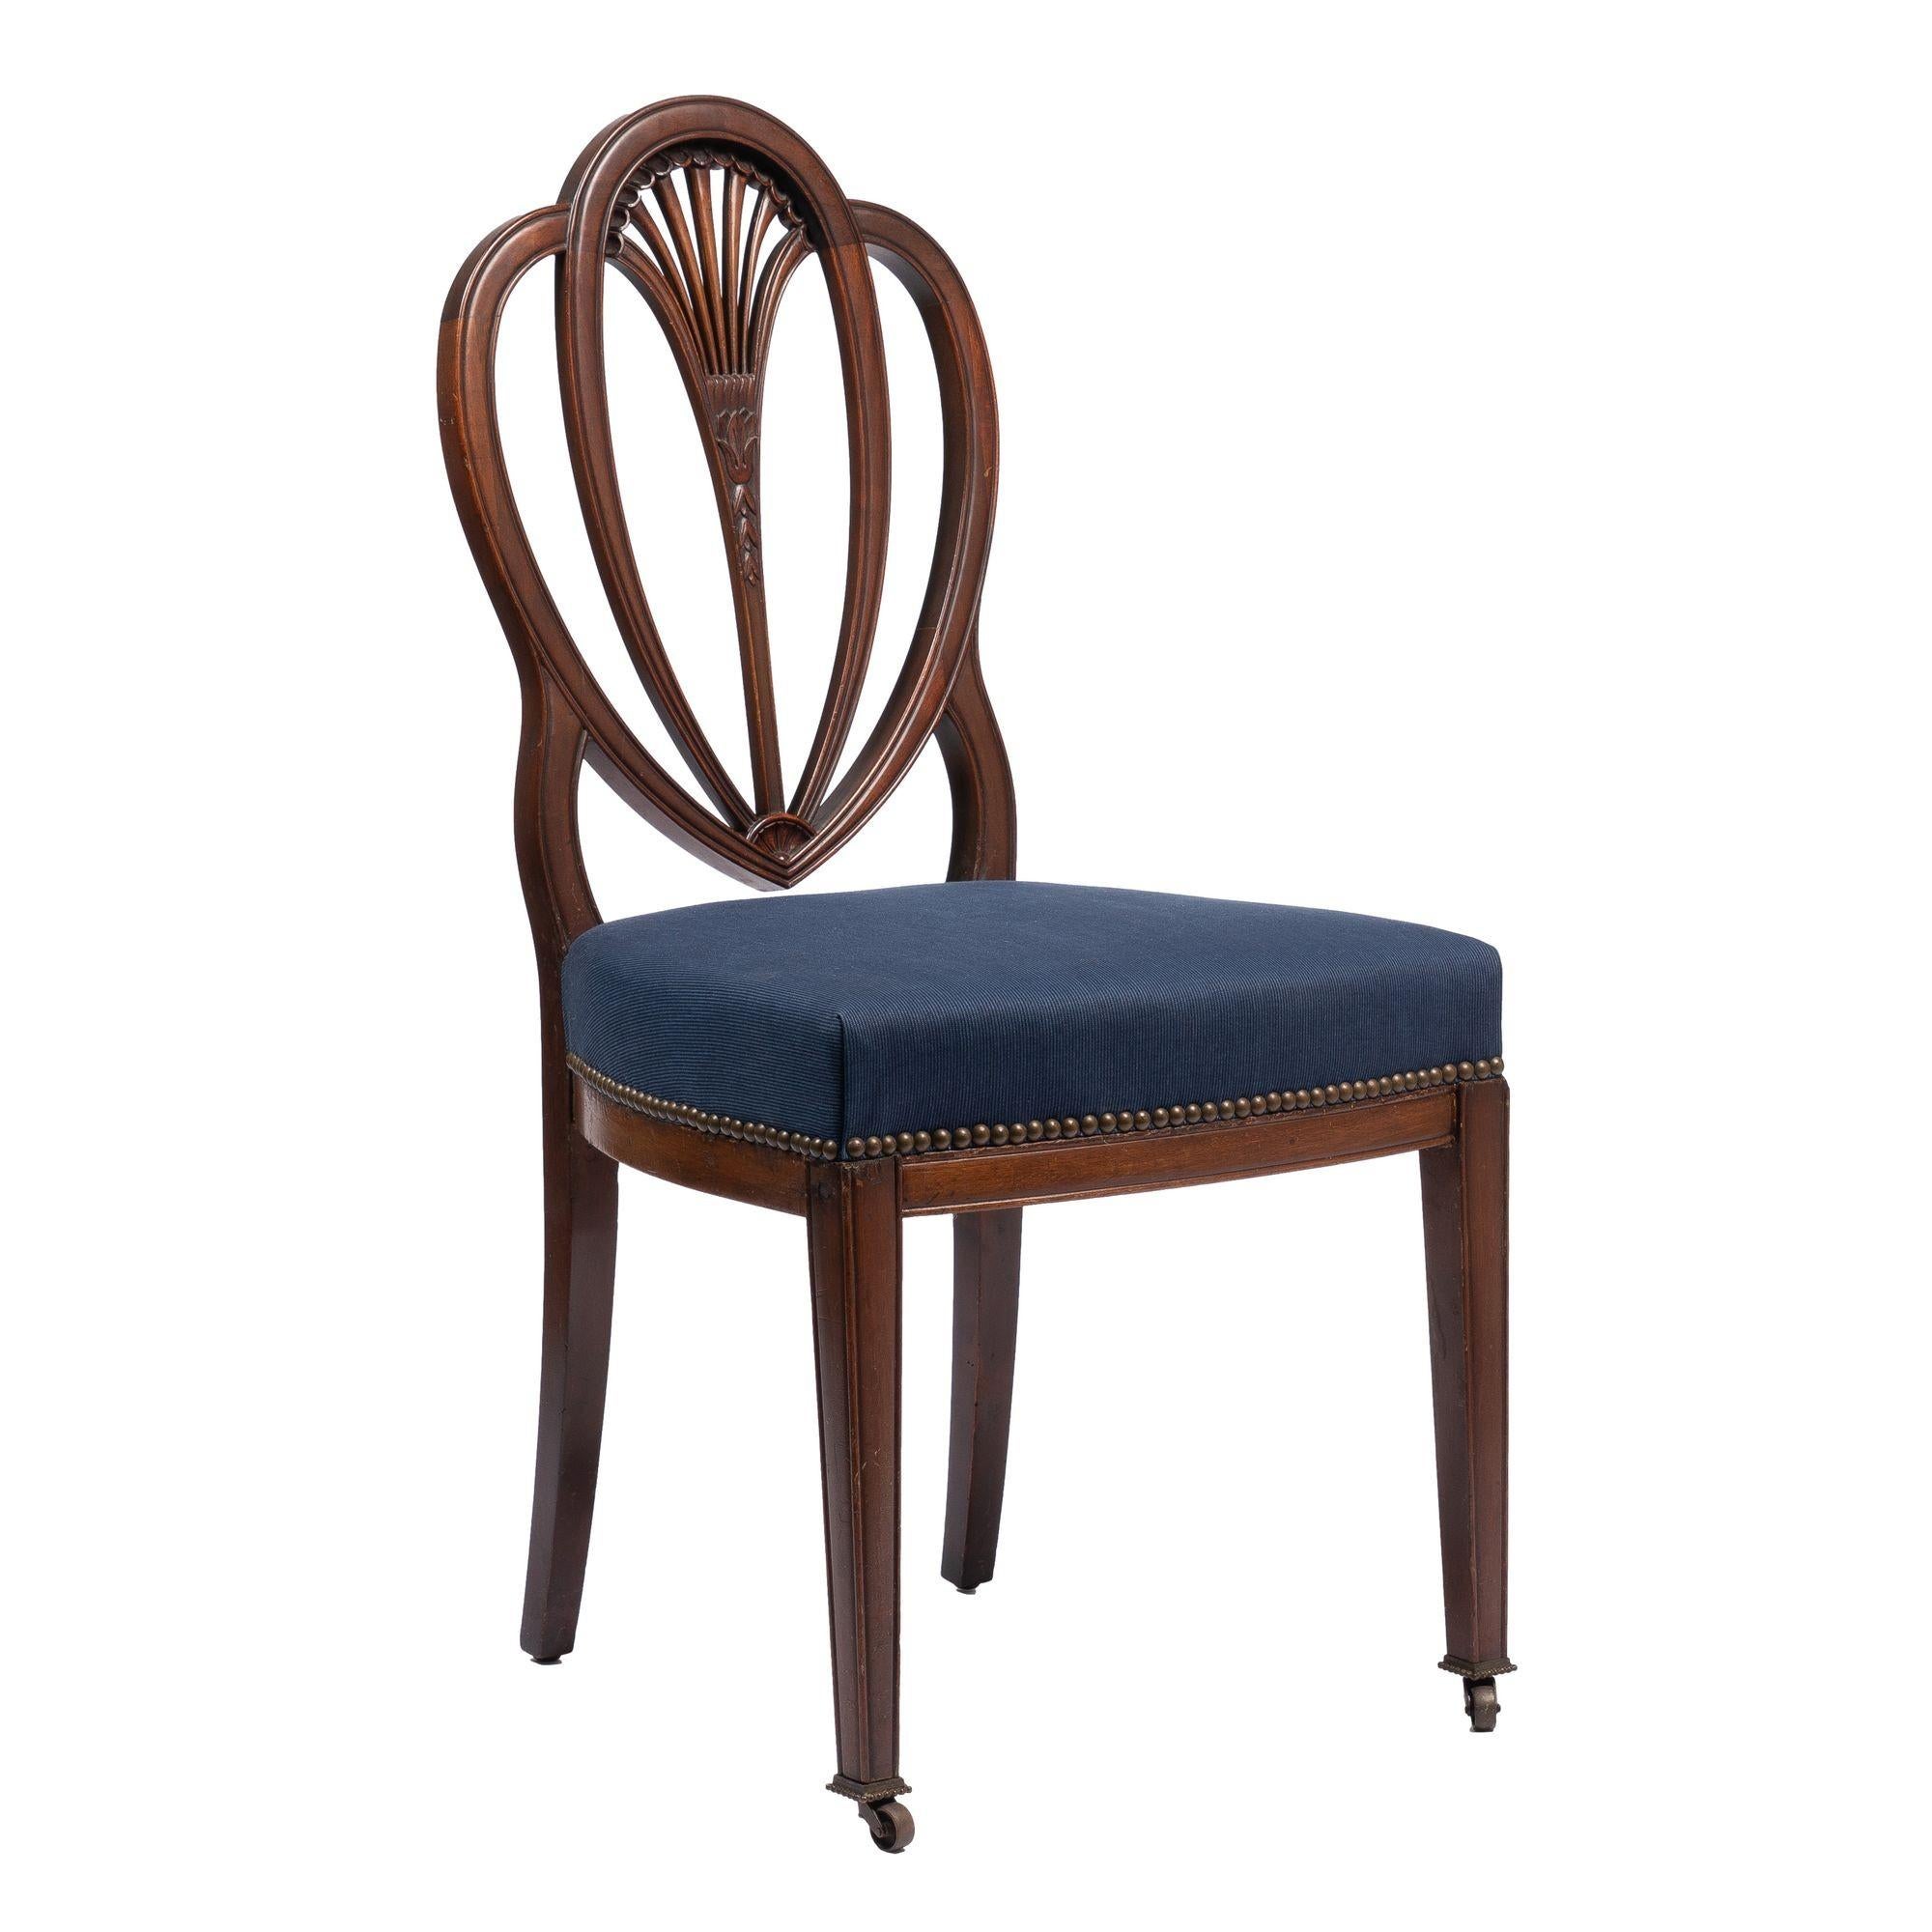 Pair of Academic Revival Federal Mahogany Heart Back Side Chairs, 1900-25 For Sale 3